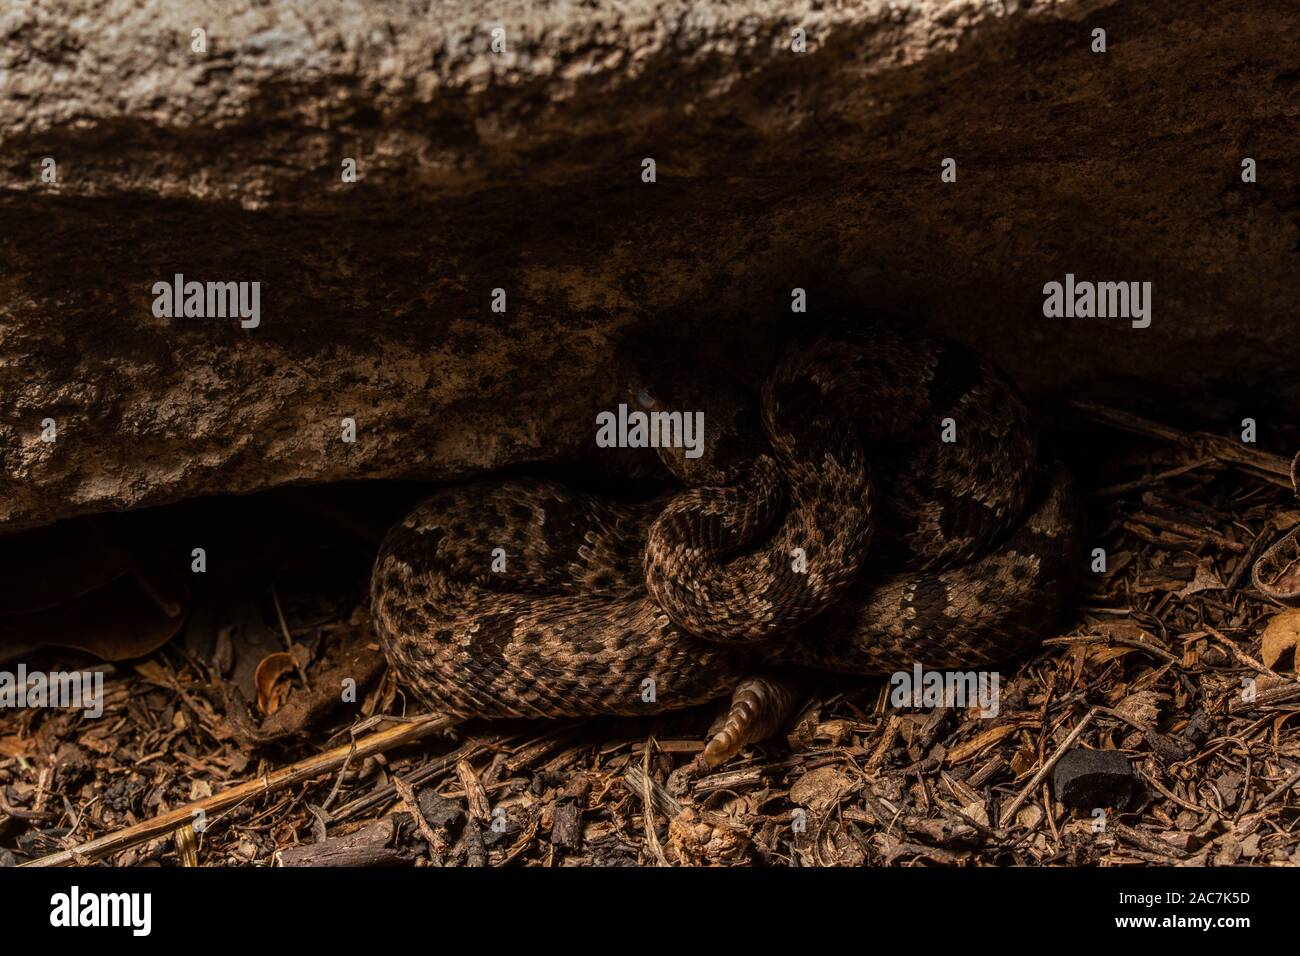 Banded Rock Rattlesnake (Crotalus lepidus klauberi) from the Sierra Madre in Sonora, Mexico. Stock Photo